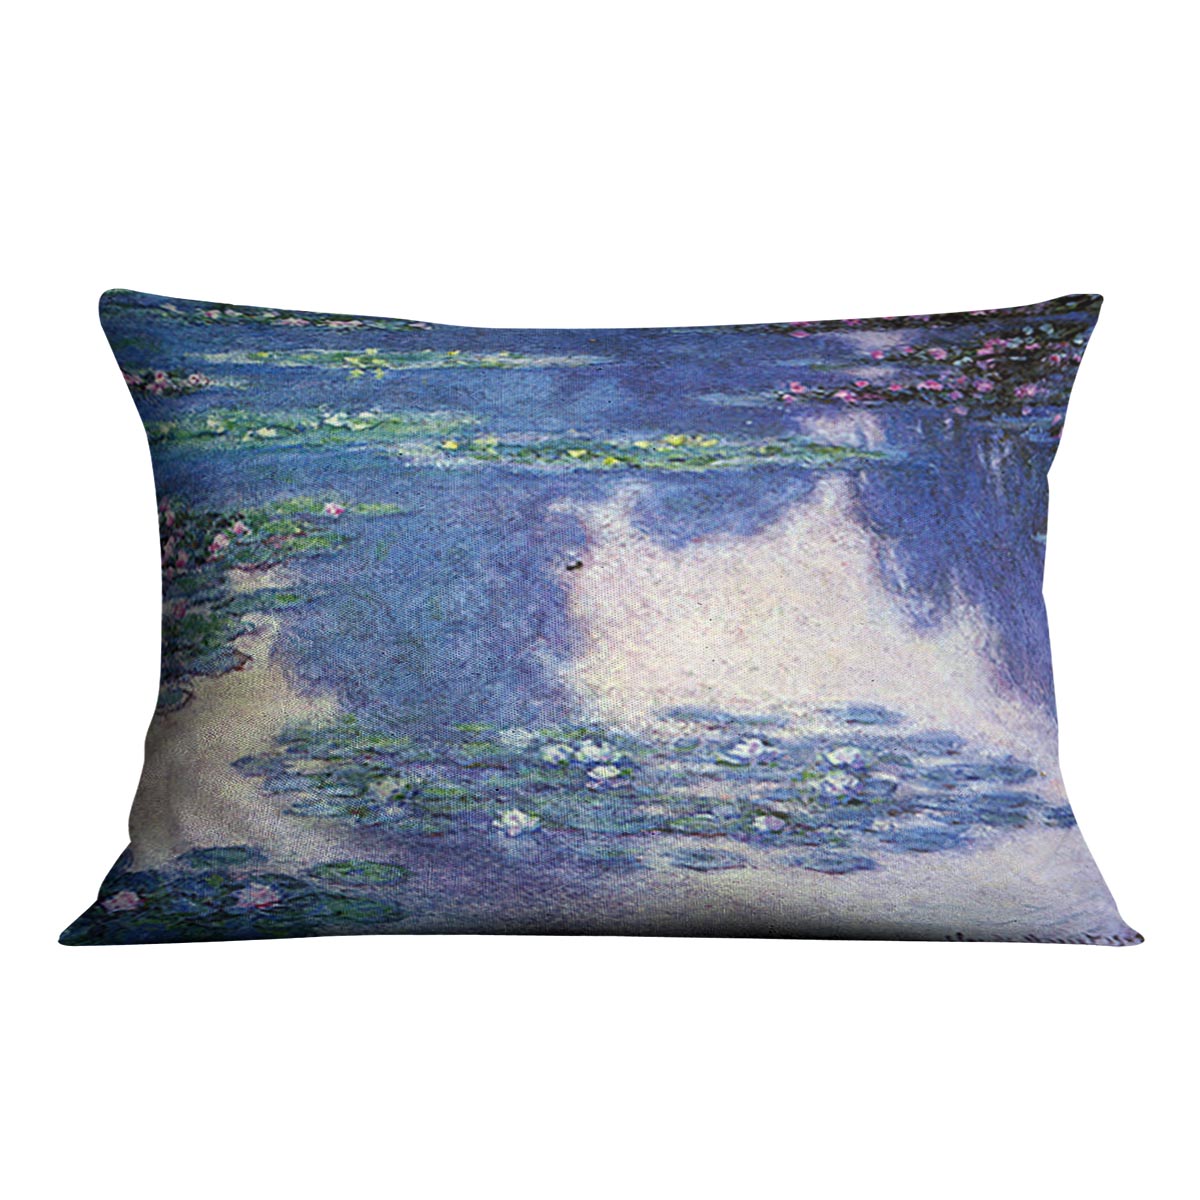 Water lilies water landscape 4 by Monet Cushion